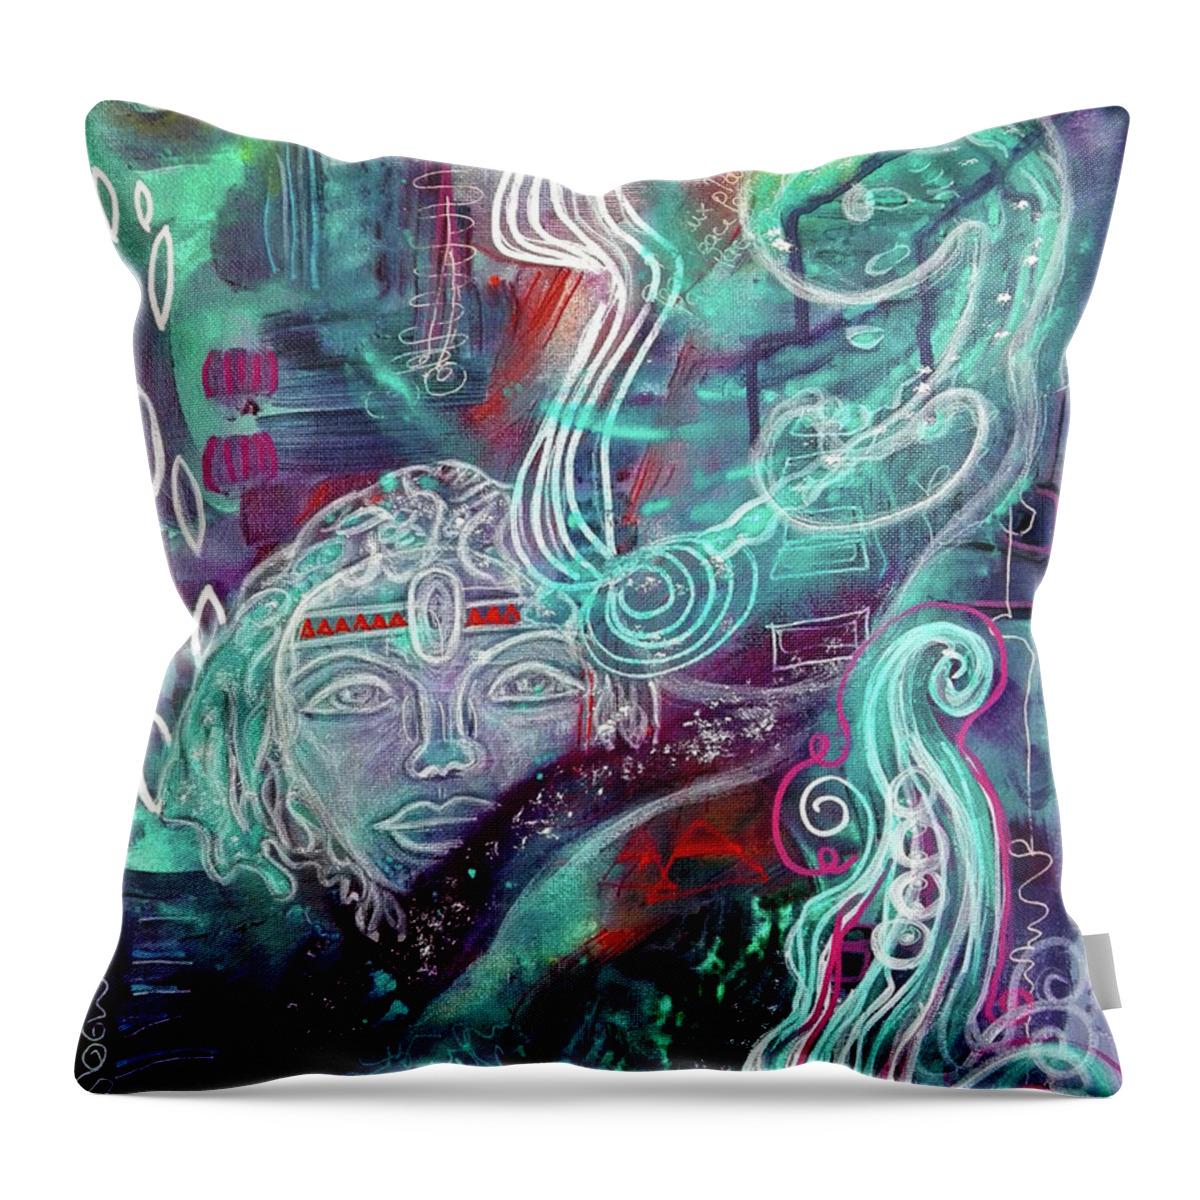 Woman Throw Pillow featuring the mixed media Eternal Woman by Mimulux Patricia No